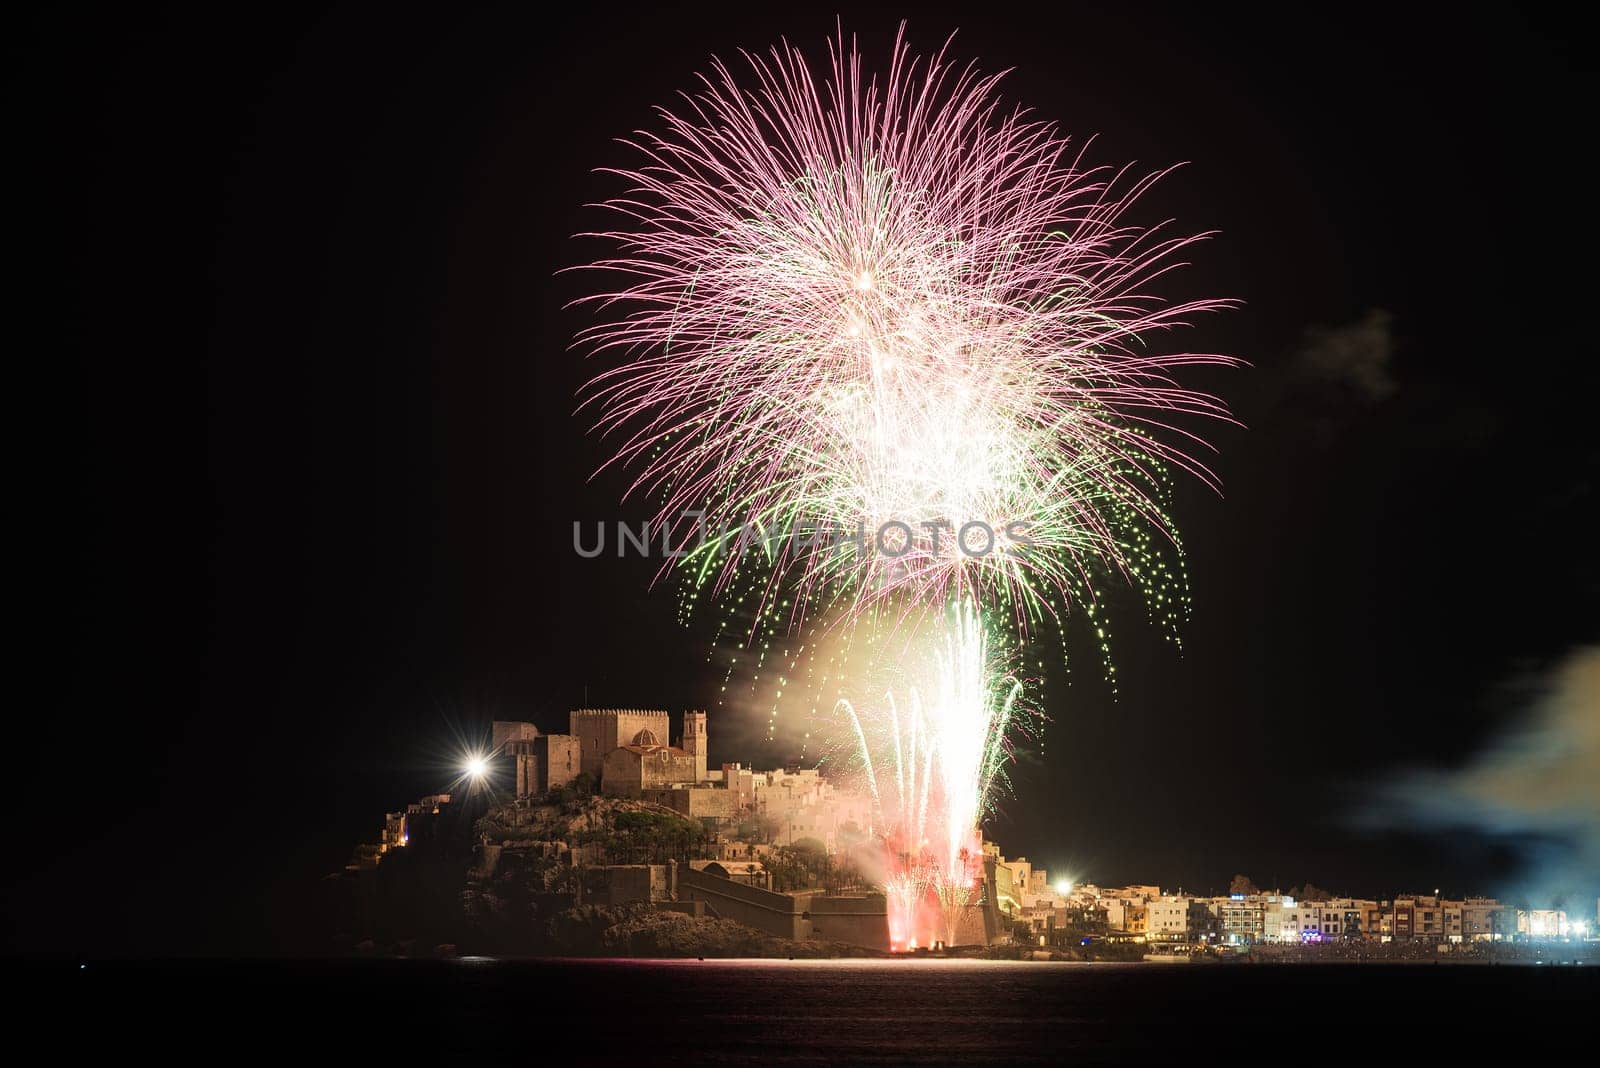 A stunning night photograph of Peniscola village featuring the castle, houses, and palm-style fireworks in various colors, the golden one captured with a 600mm telephoto lens